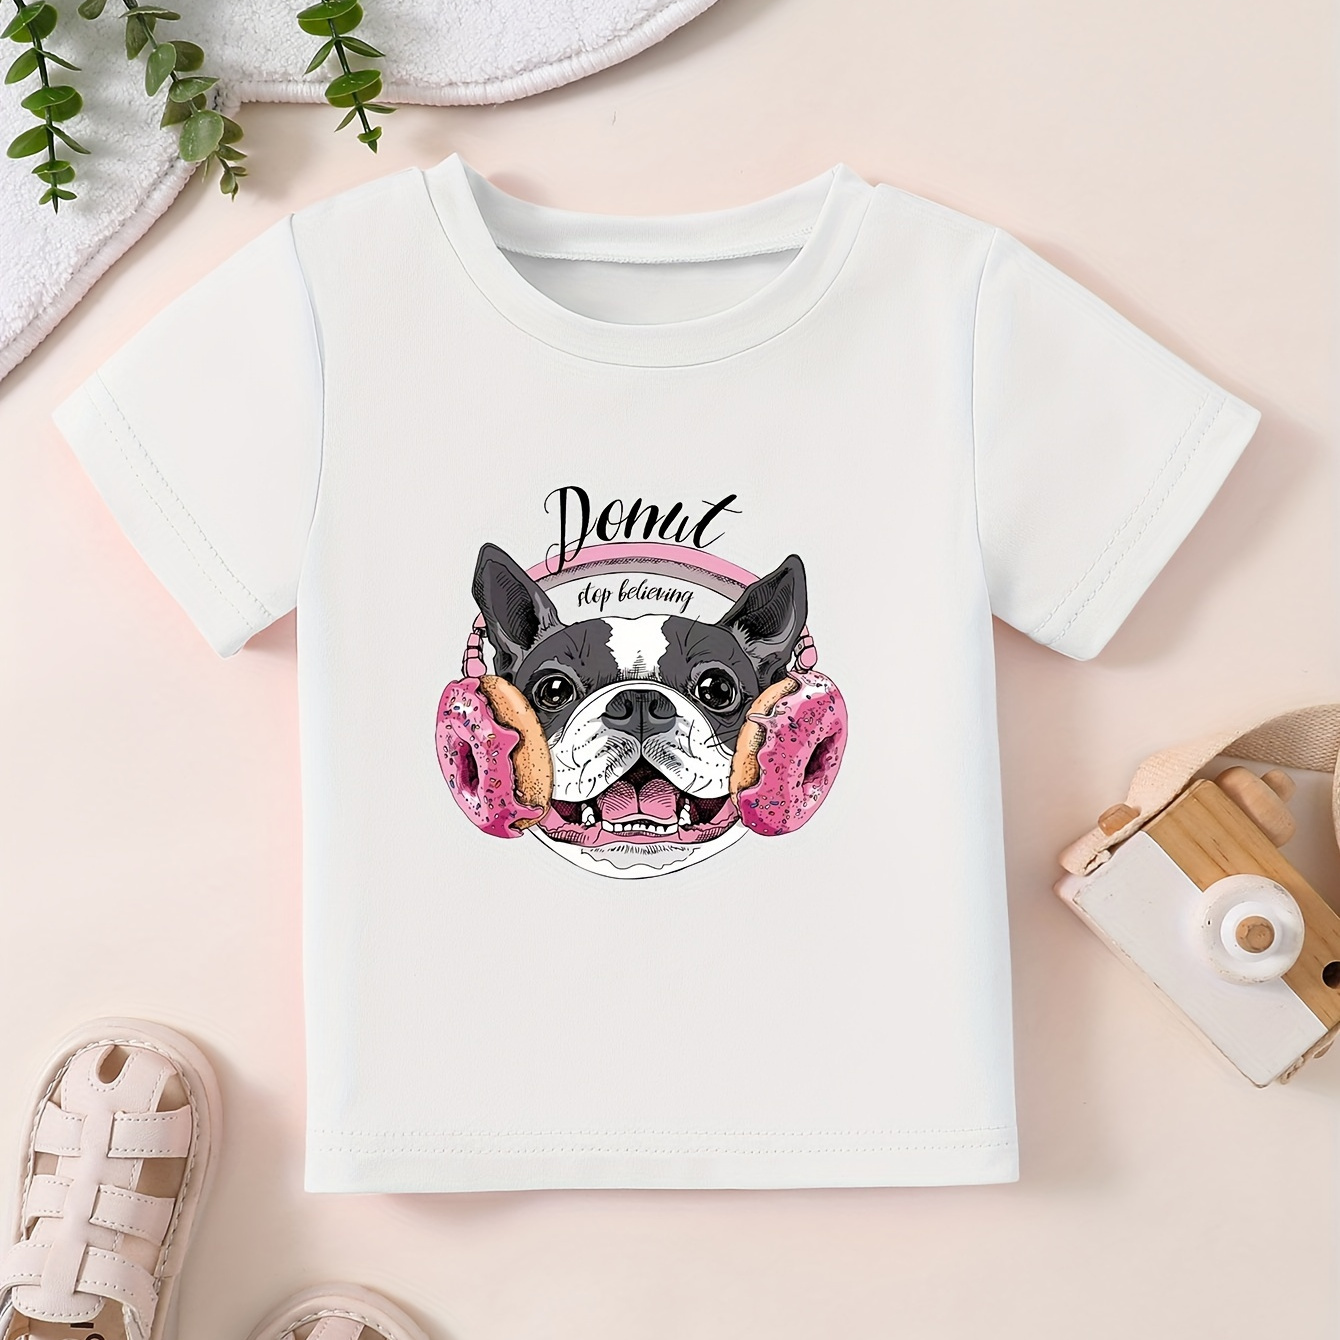 

Cute Dog Print, Girls Graphic Design Crew Neck T-shirt, Casual Comfy Tees Tshirts For Summer